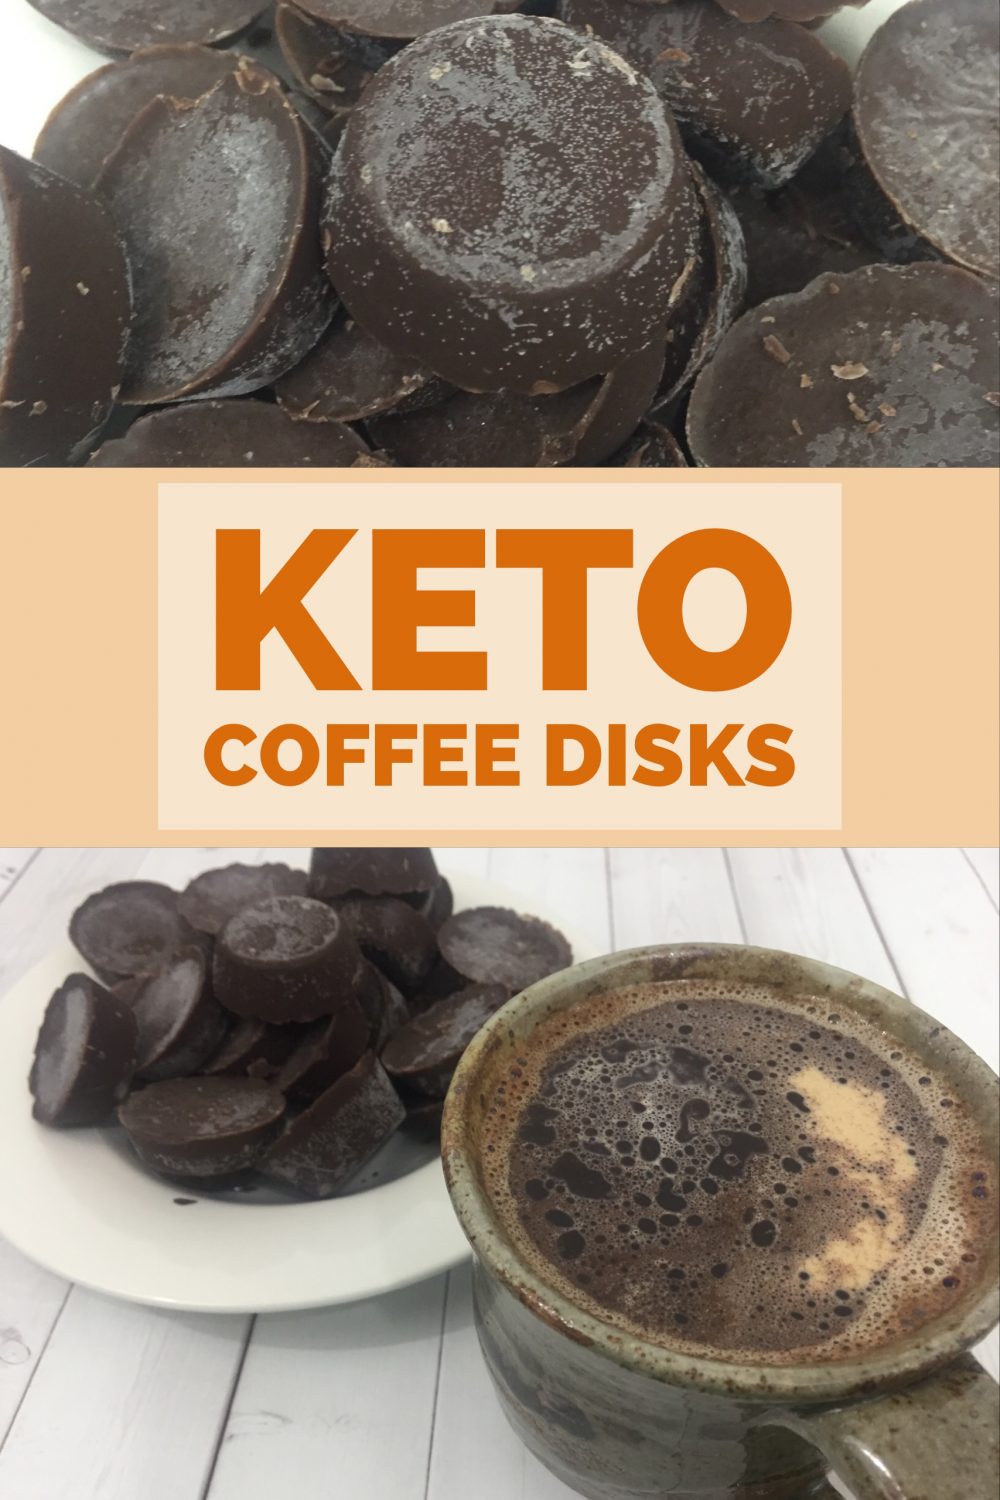 Keto Coffee Disks Butter Coffee Bullet Proof Coffee Paleo Low-Carb High-Fat juiledkohl.com